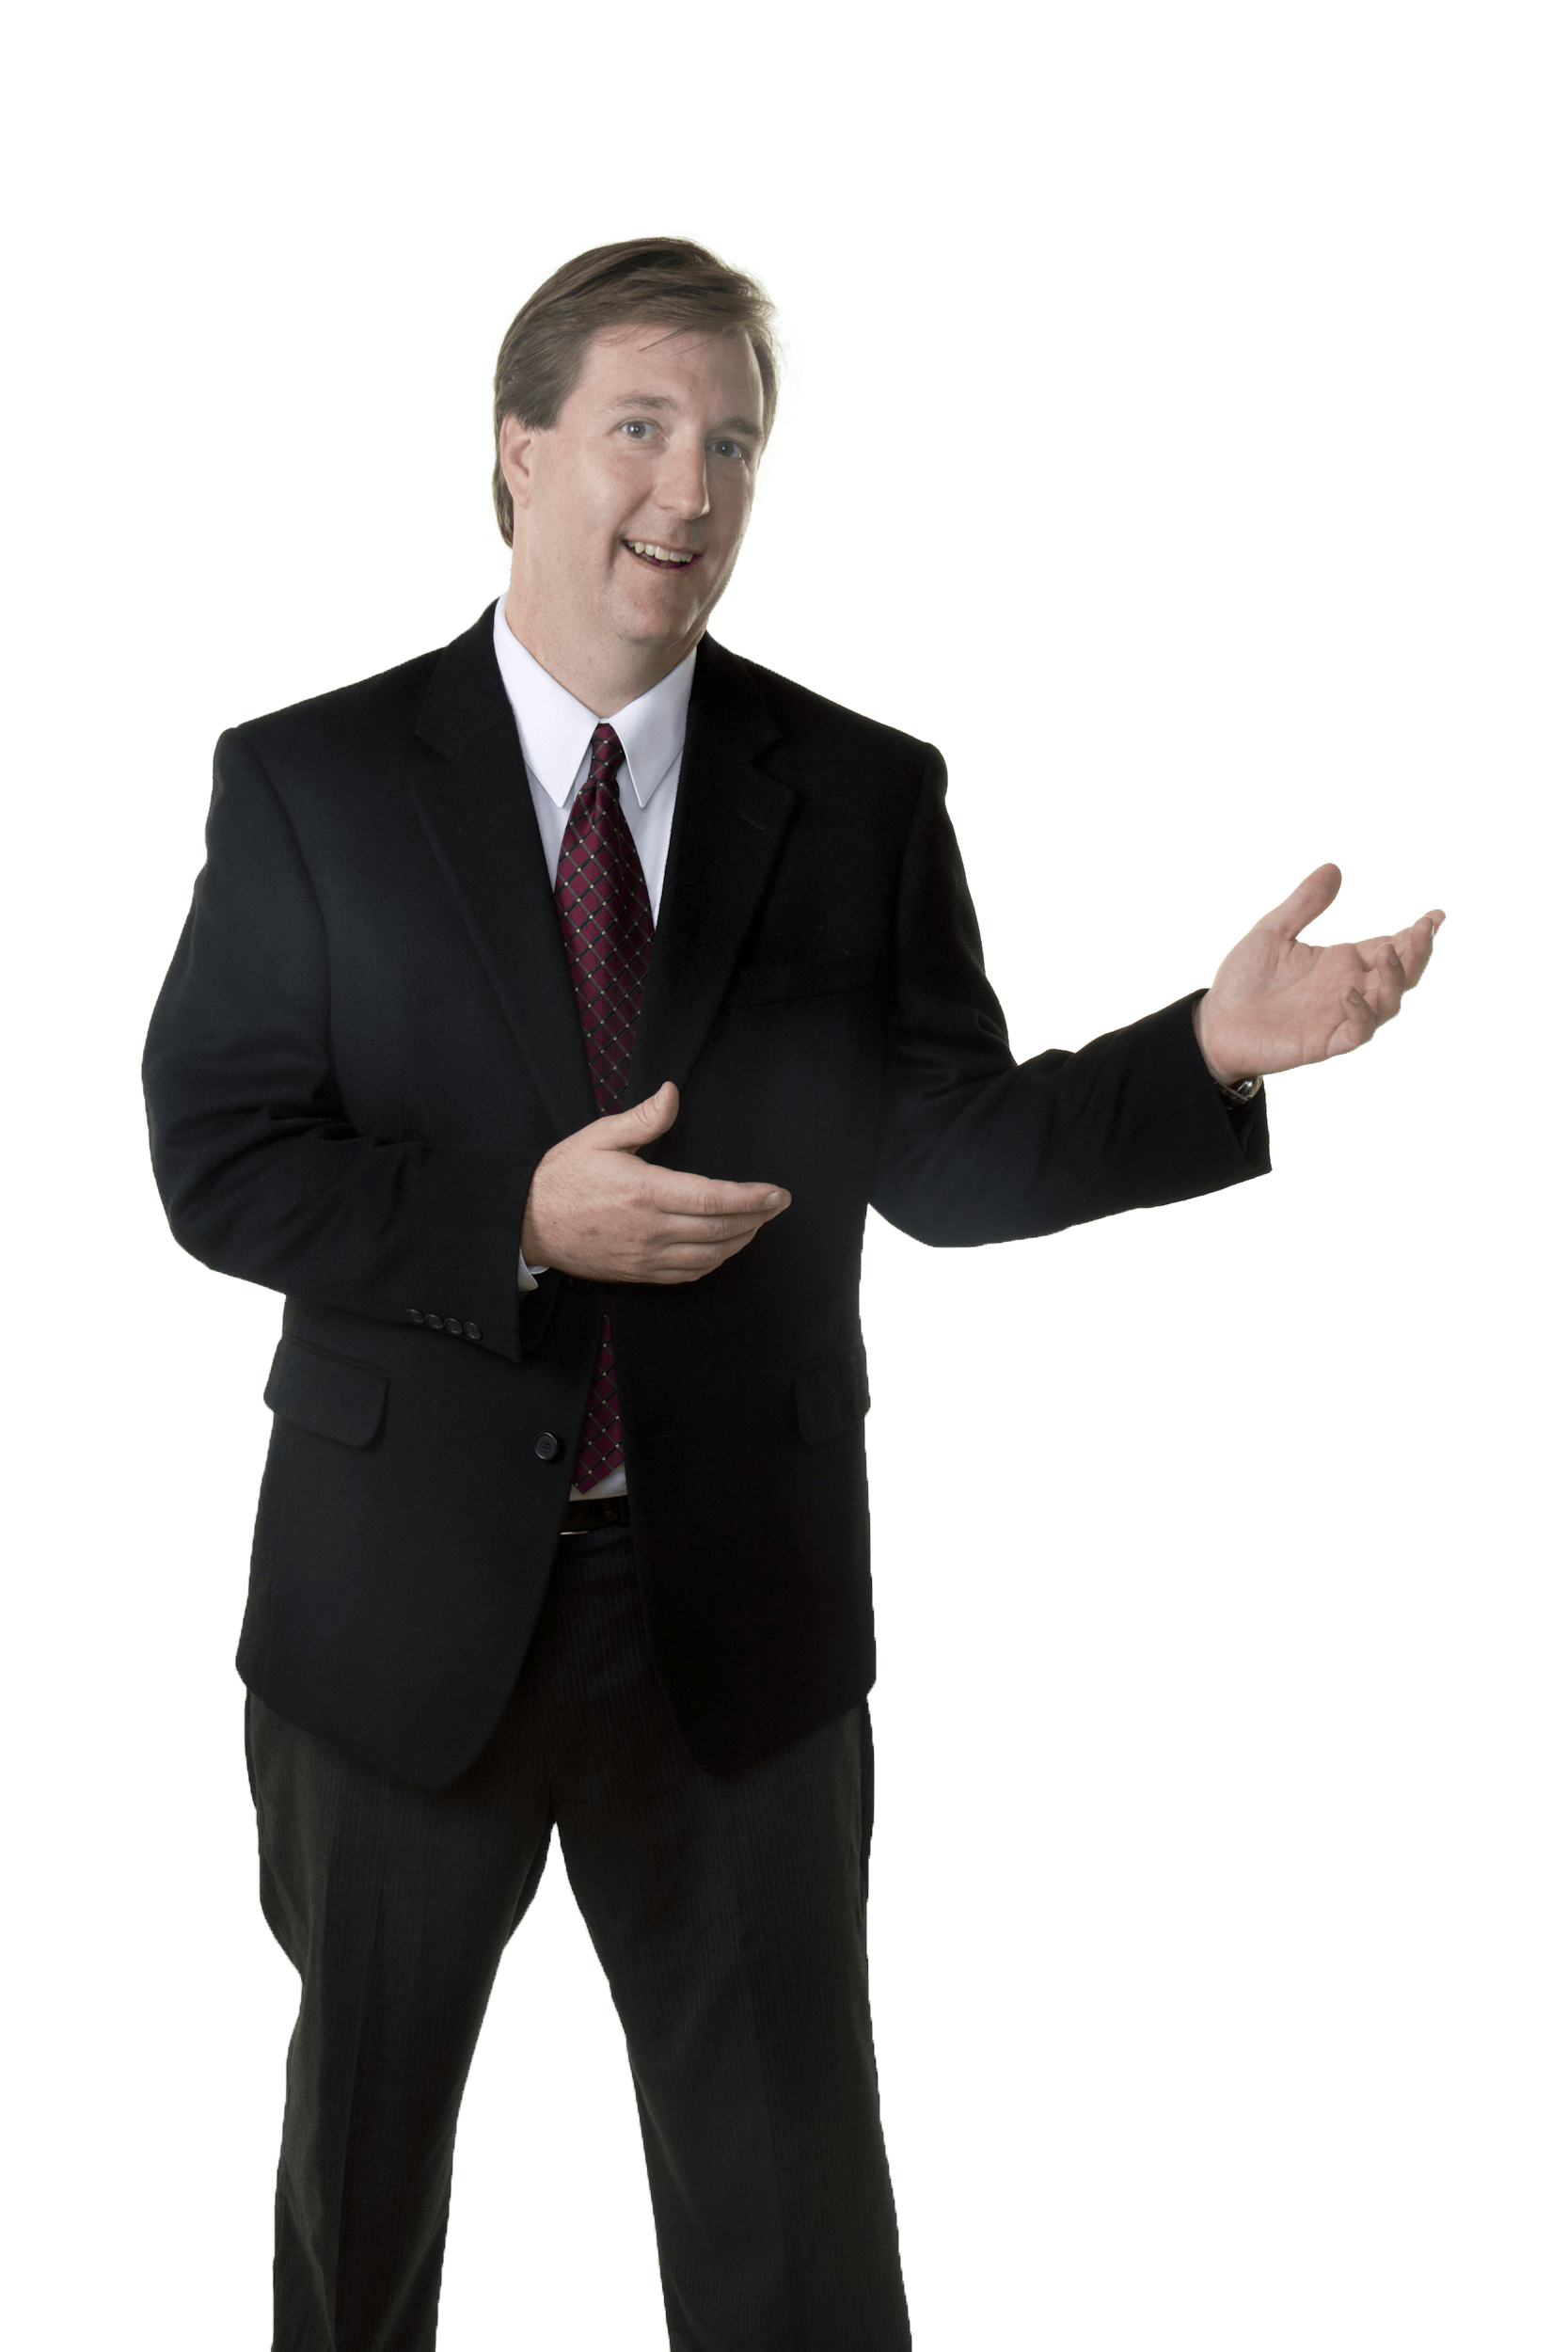 Standing Smiling Business Man PNG Download Free PNG Image